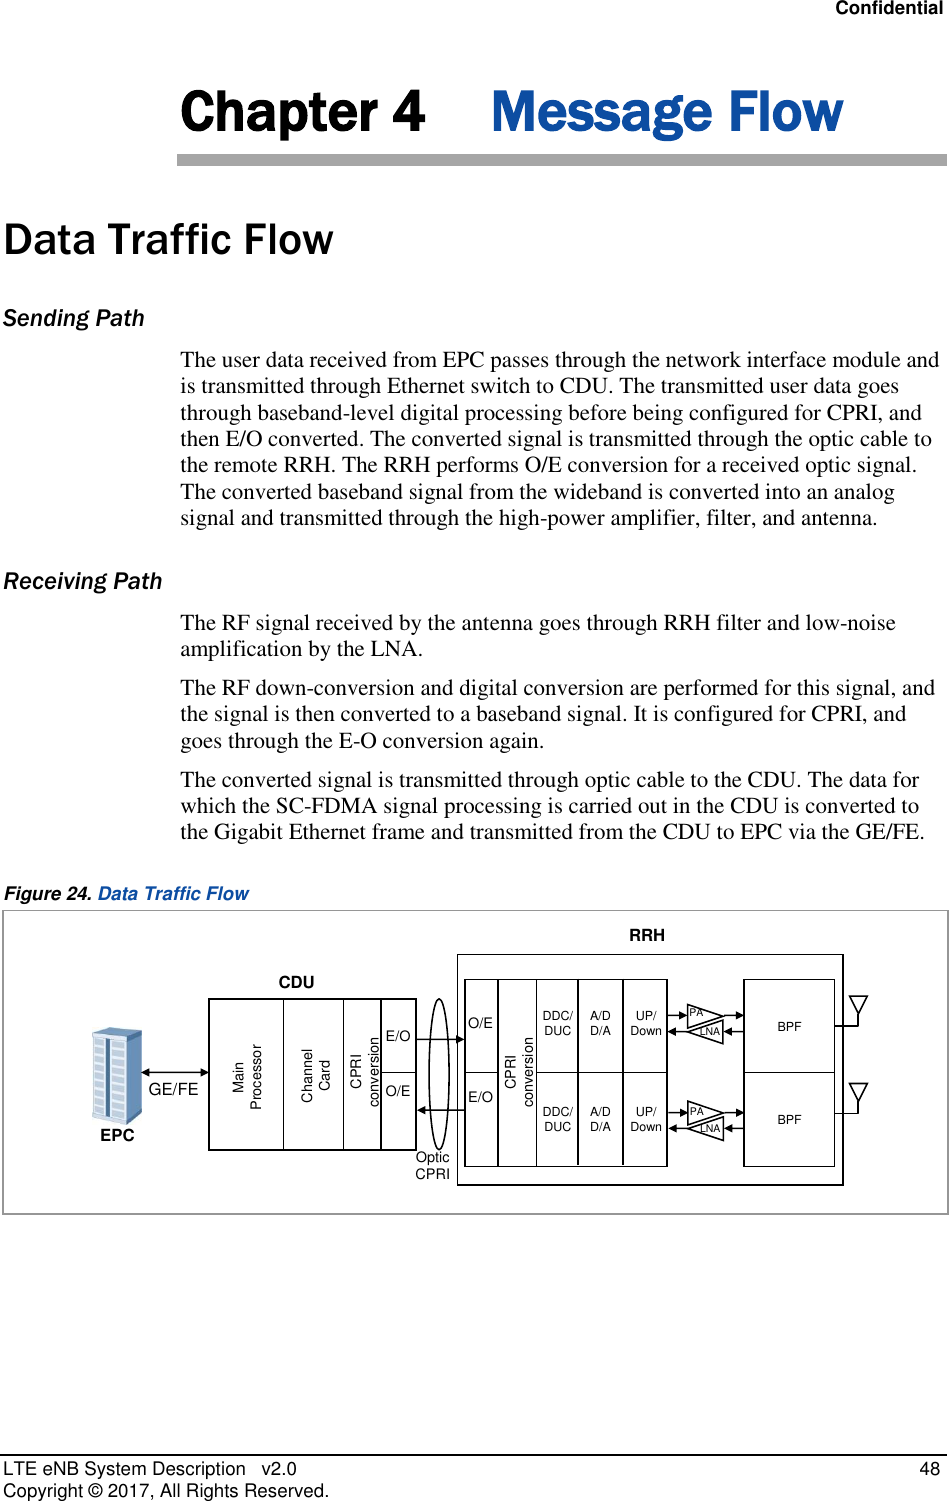 Confidential LTE eNB System Description   v2.0   48 Copyright ©  2017, All Rights Reserved. Chapter 4 Message Flow Data Traffic Flow Sending Path The user data received from EPC passes through the network interface module and is transmitted through Ethernet switch to CDU. The transmitted user data goes through baseband-level digital processing before being configured for CPRI, and then E/O converted. The converted signal is transmitted through the optic cable to the remote RRH. The RRH performs O/E conversion for a received optic signal. The converted baseband signal from the wideband is converted into an analog signal and transmitted through the high-power amplifier, filter, and antenna. Receiving Path The RF signal received by the antenna goes through RRH filter and low-noise amplification by the LNA. The RF down-conversion and digital conversion are performed for this signal, and the signal is then converted to a baseband signal. It is configured for CPRI, and goes through the E-O conversion again. The converted signal is transmitted through optic cable to the CDU. The data for which the SC-FDMA signal processing is carried out in the CDU is converted to the Gigabit Ethernet frame and transmitted from the CDU to EPC via the GE/FE. Figure 24. Data Traffic Flow     EPC GE/FE Main Processor Channel Card CPRI conversion E/O   O/E RRH O/E    E/O DDC/ DUC A/D D/A UP/ Down DDC/ DUC A/D D/A UP/ Down BPF BPF CDU CPRI conversion Optic CPRI PA LNA PA LNA 